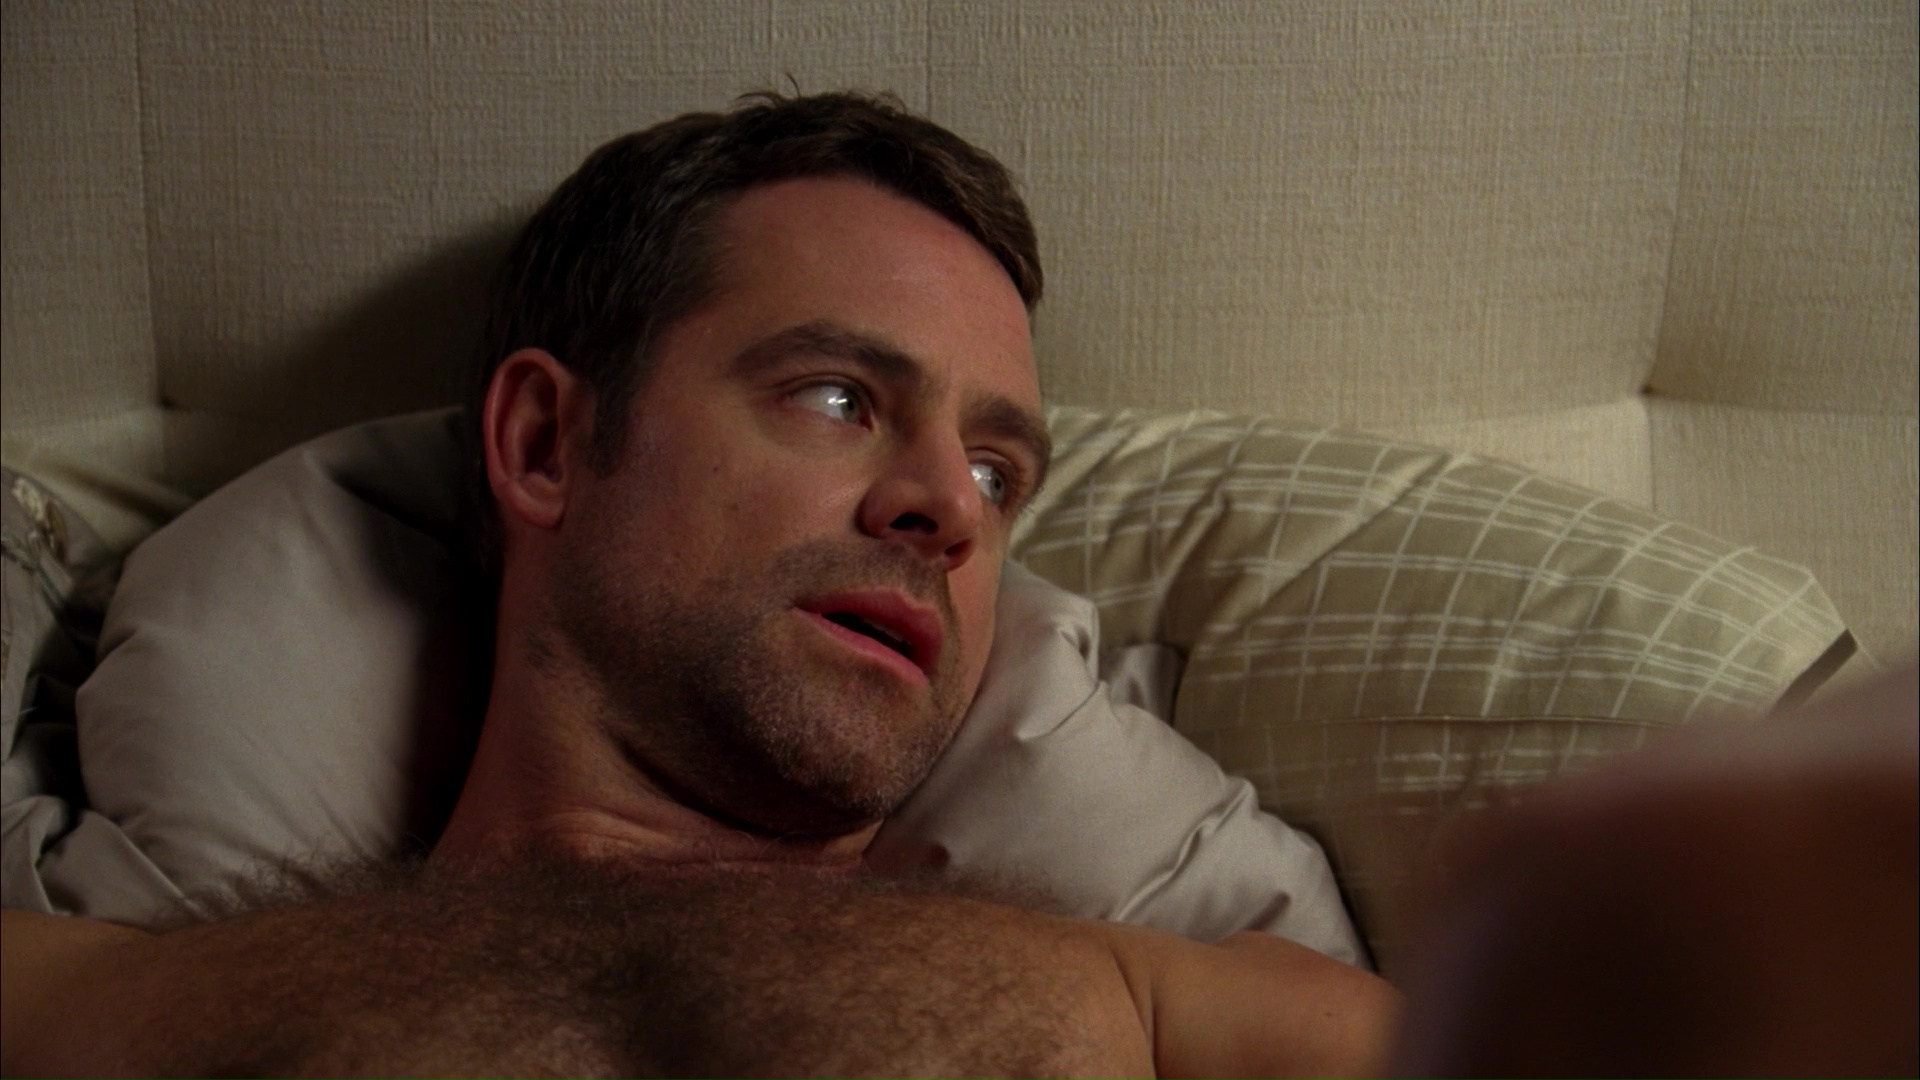 David Sutcliffe shirtless in Private Practice 2-08 "Crime And Punishme...